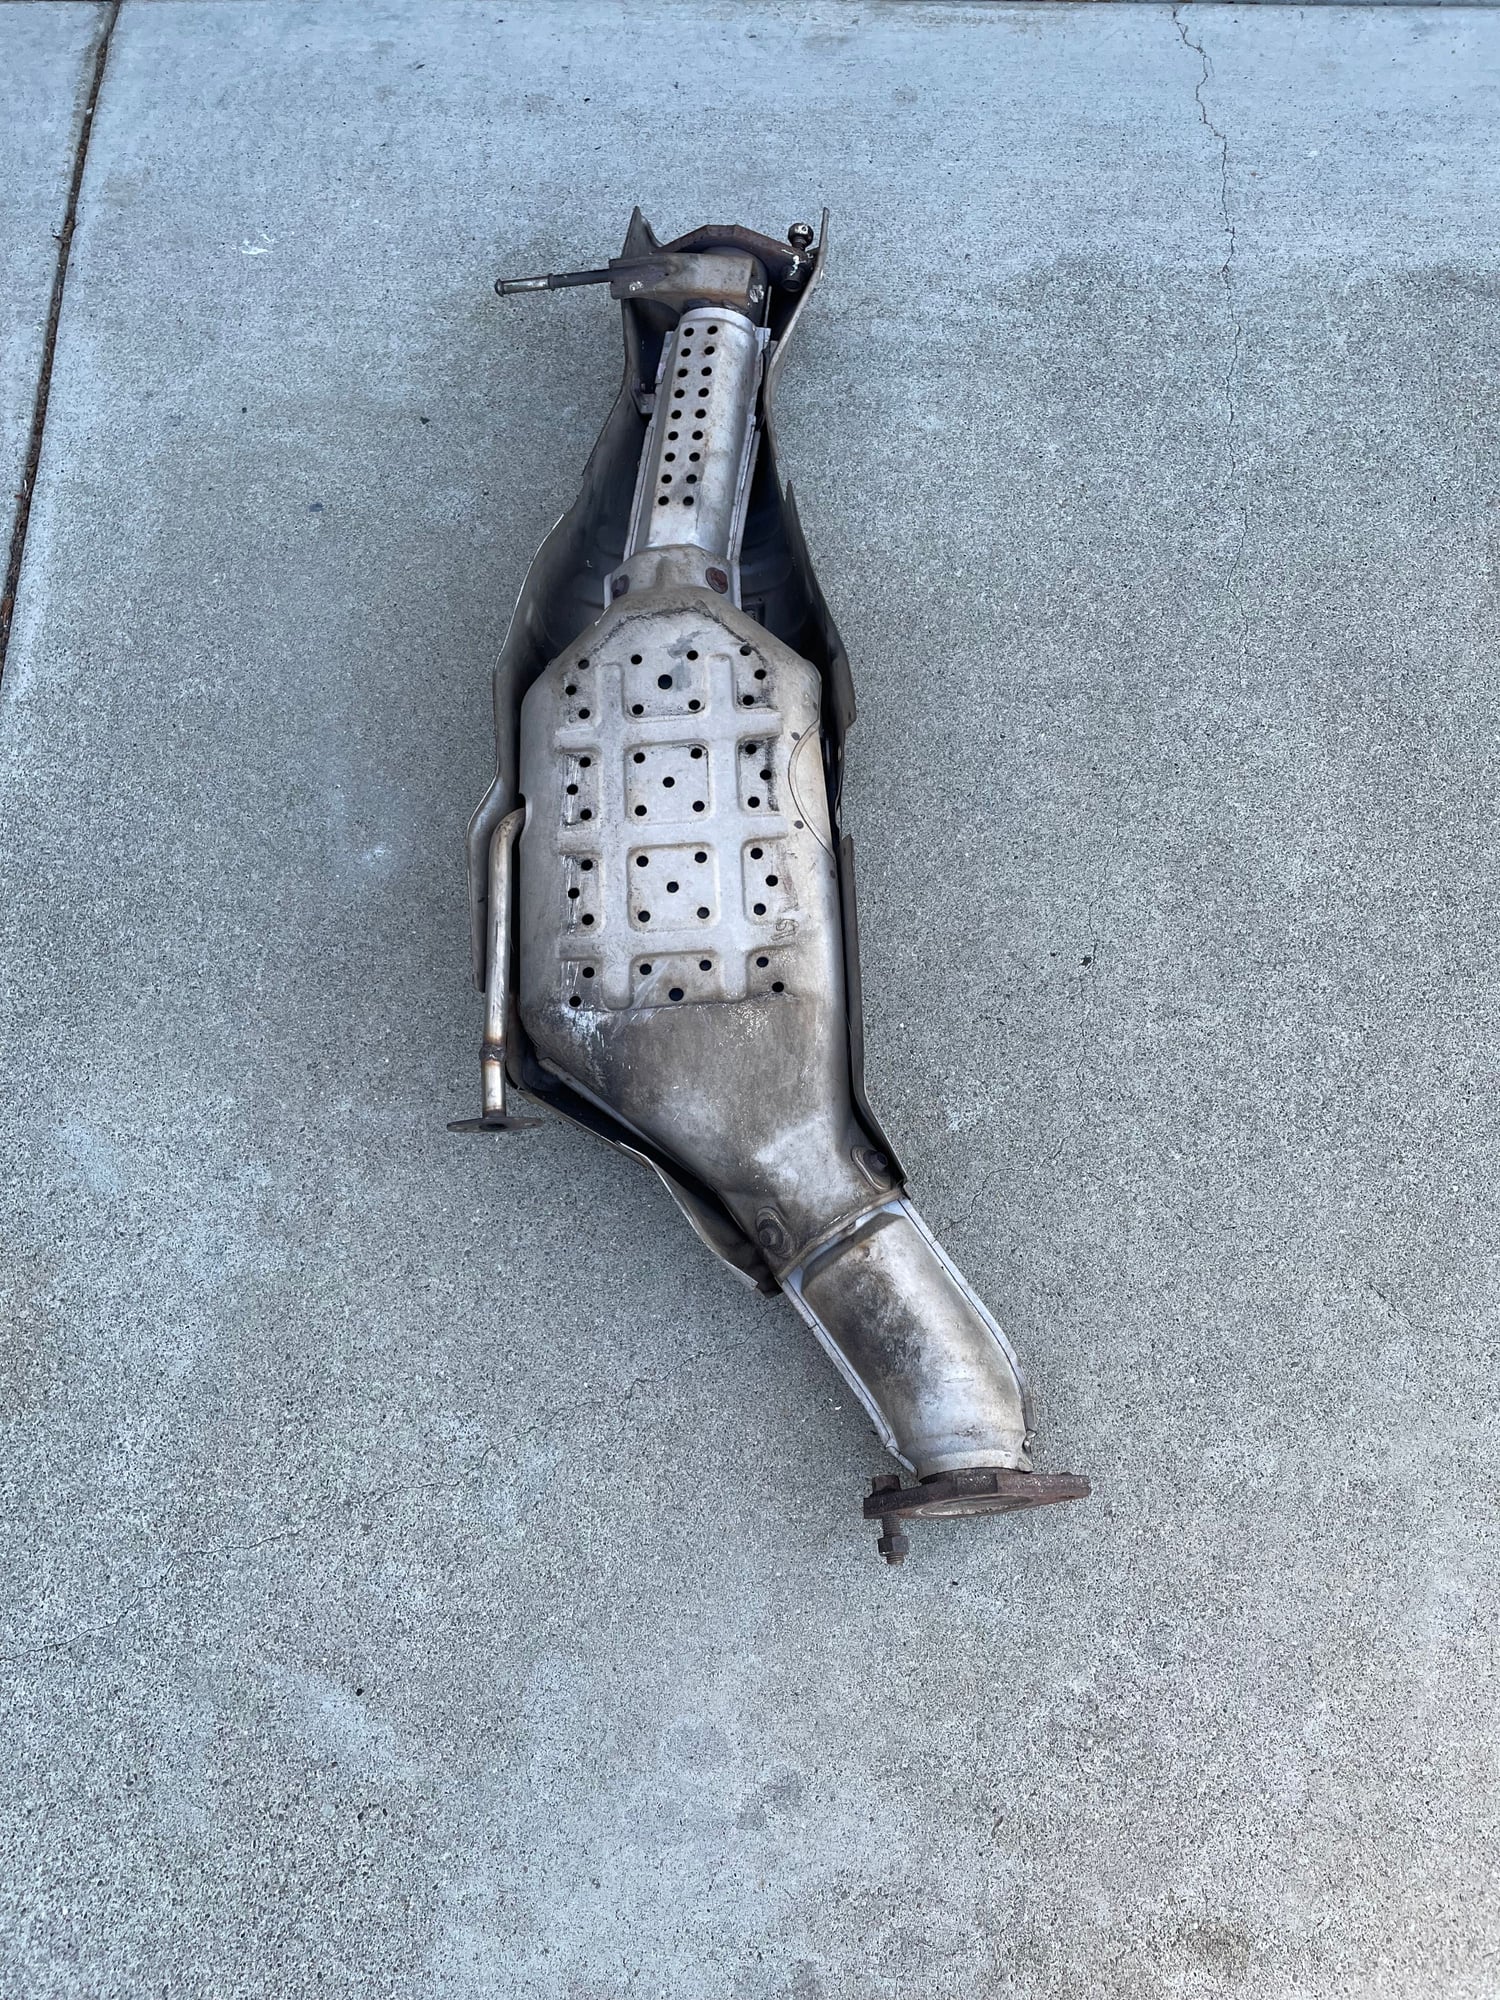 Engine - Exhaust - OEM FD catalytic Converter - Used - 1993 to 1995 Mazda RX-7 - Vacaville, CA 95688, United States